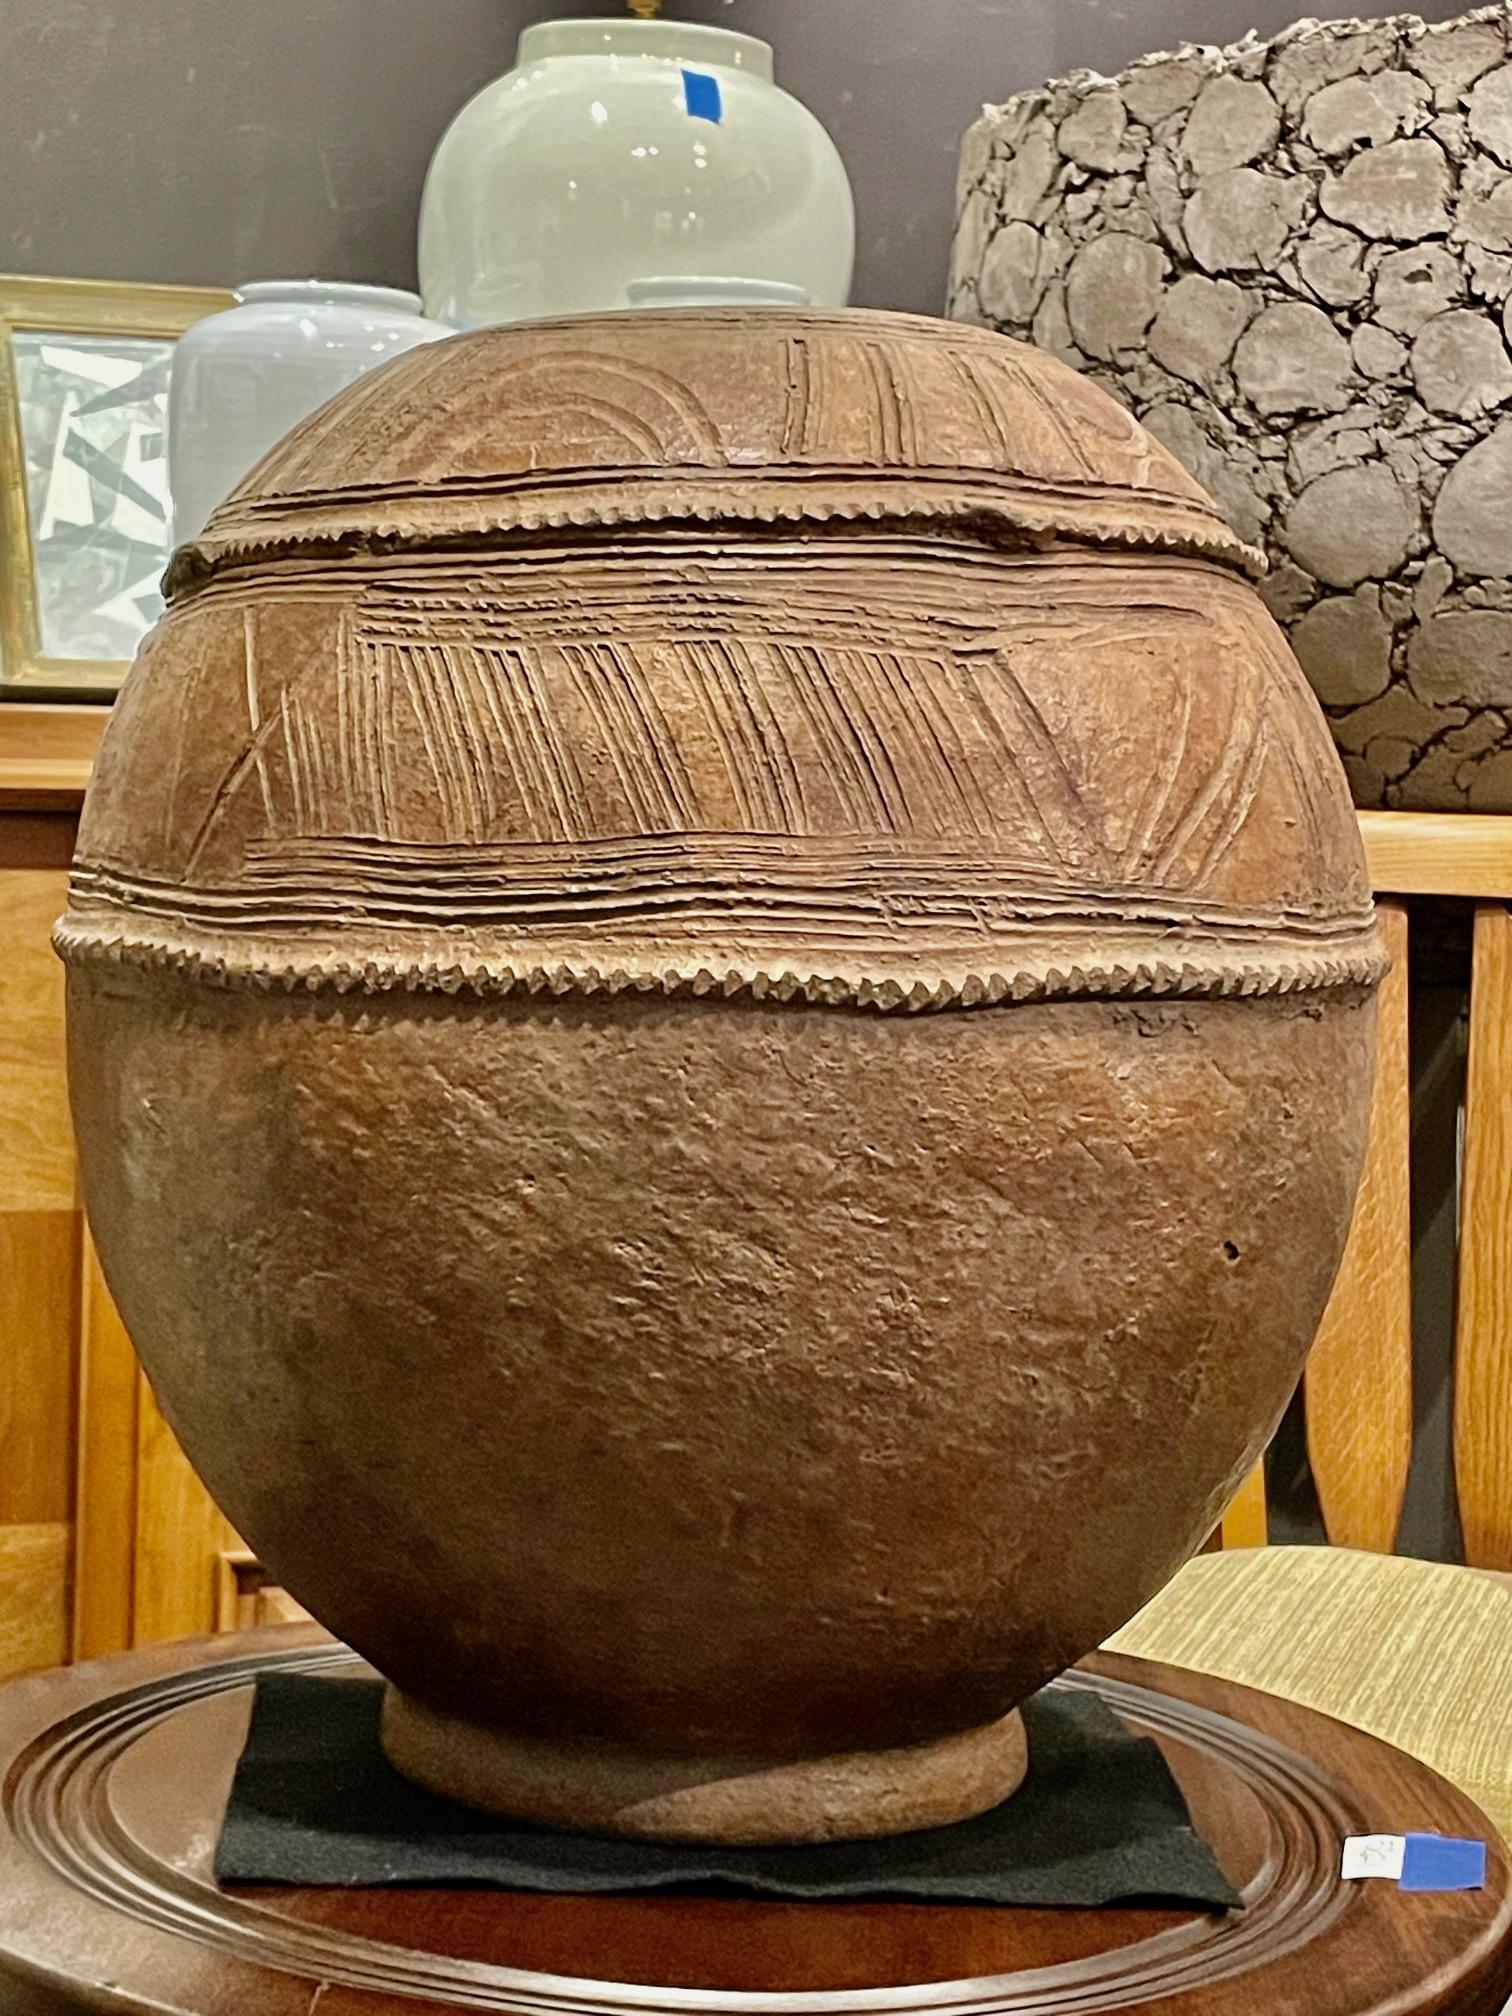 1950s Ethiopian light brown terracotta large water vessel with decorative design.
Patterned band of textured design framed by two rows of carved ribs.
Several available each having its' own distinct textured design.